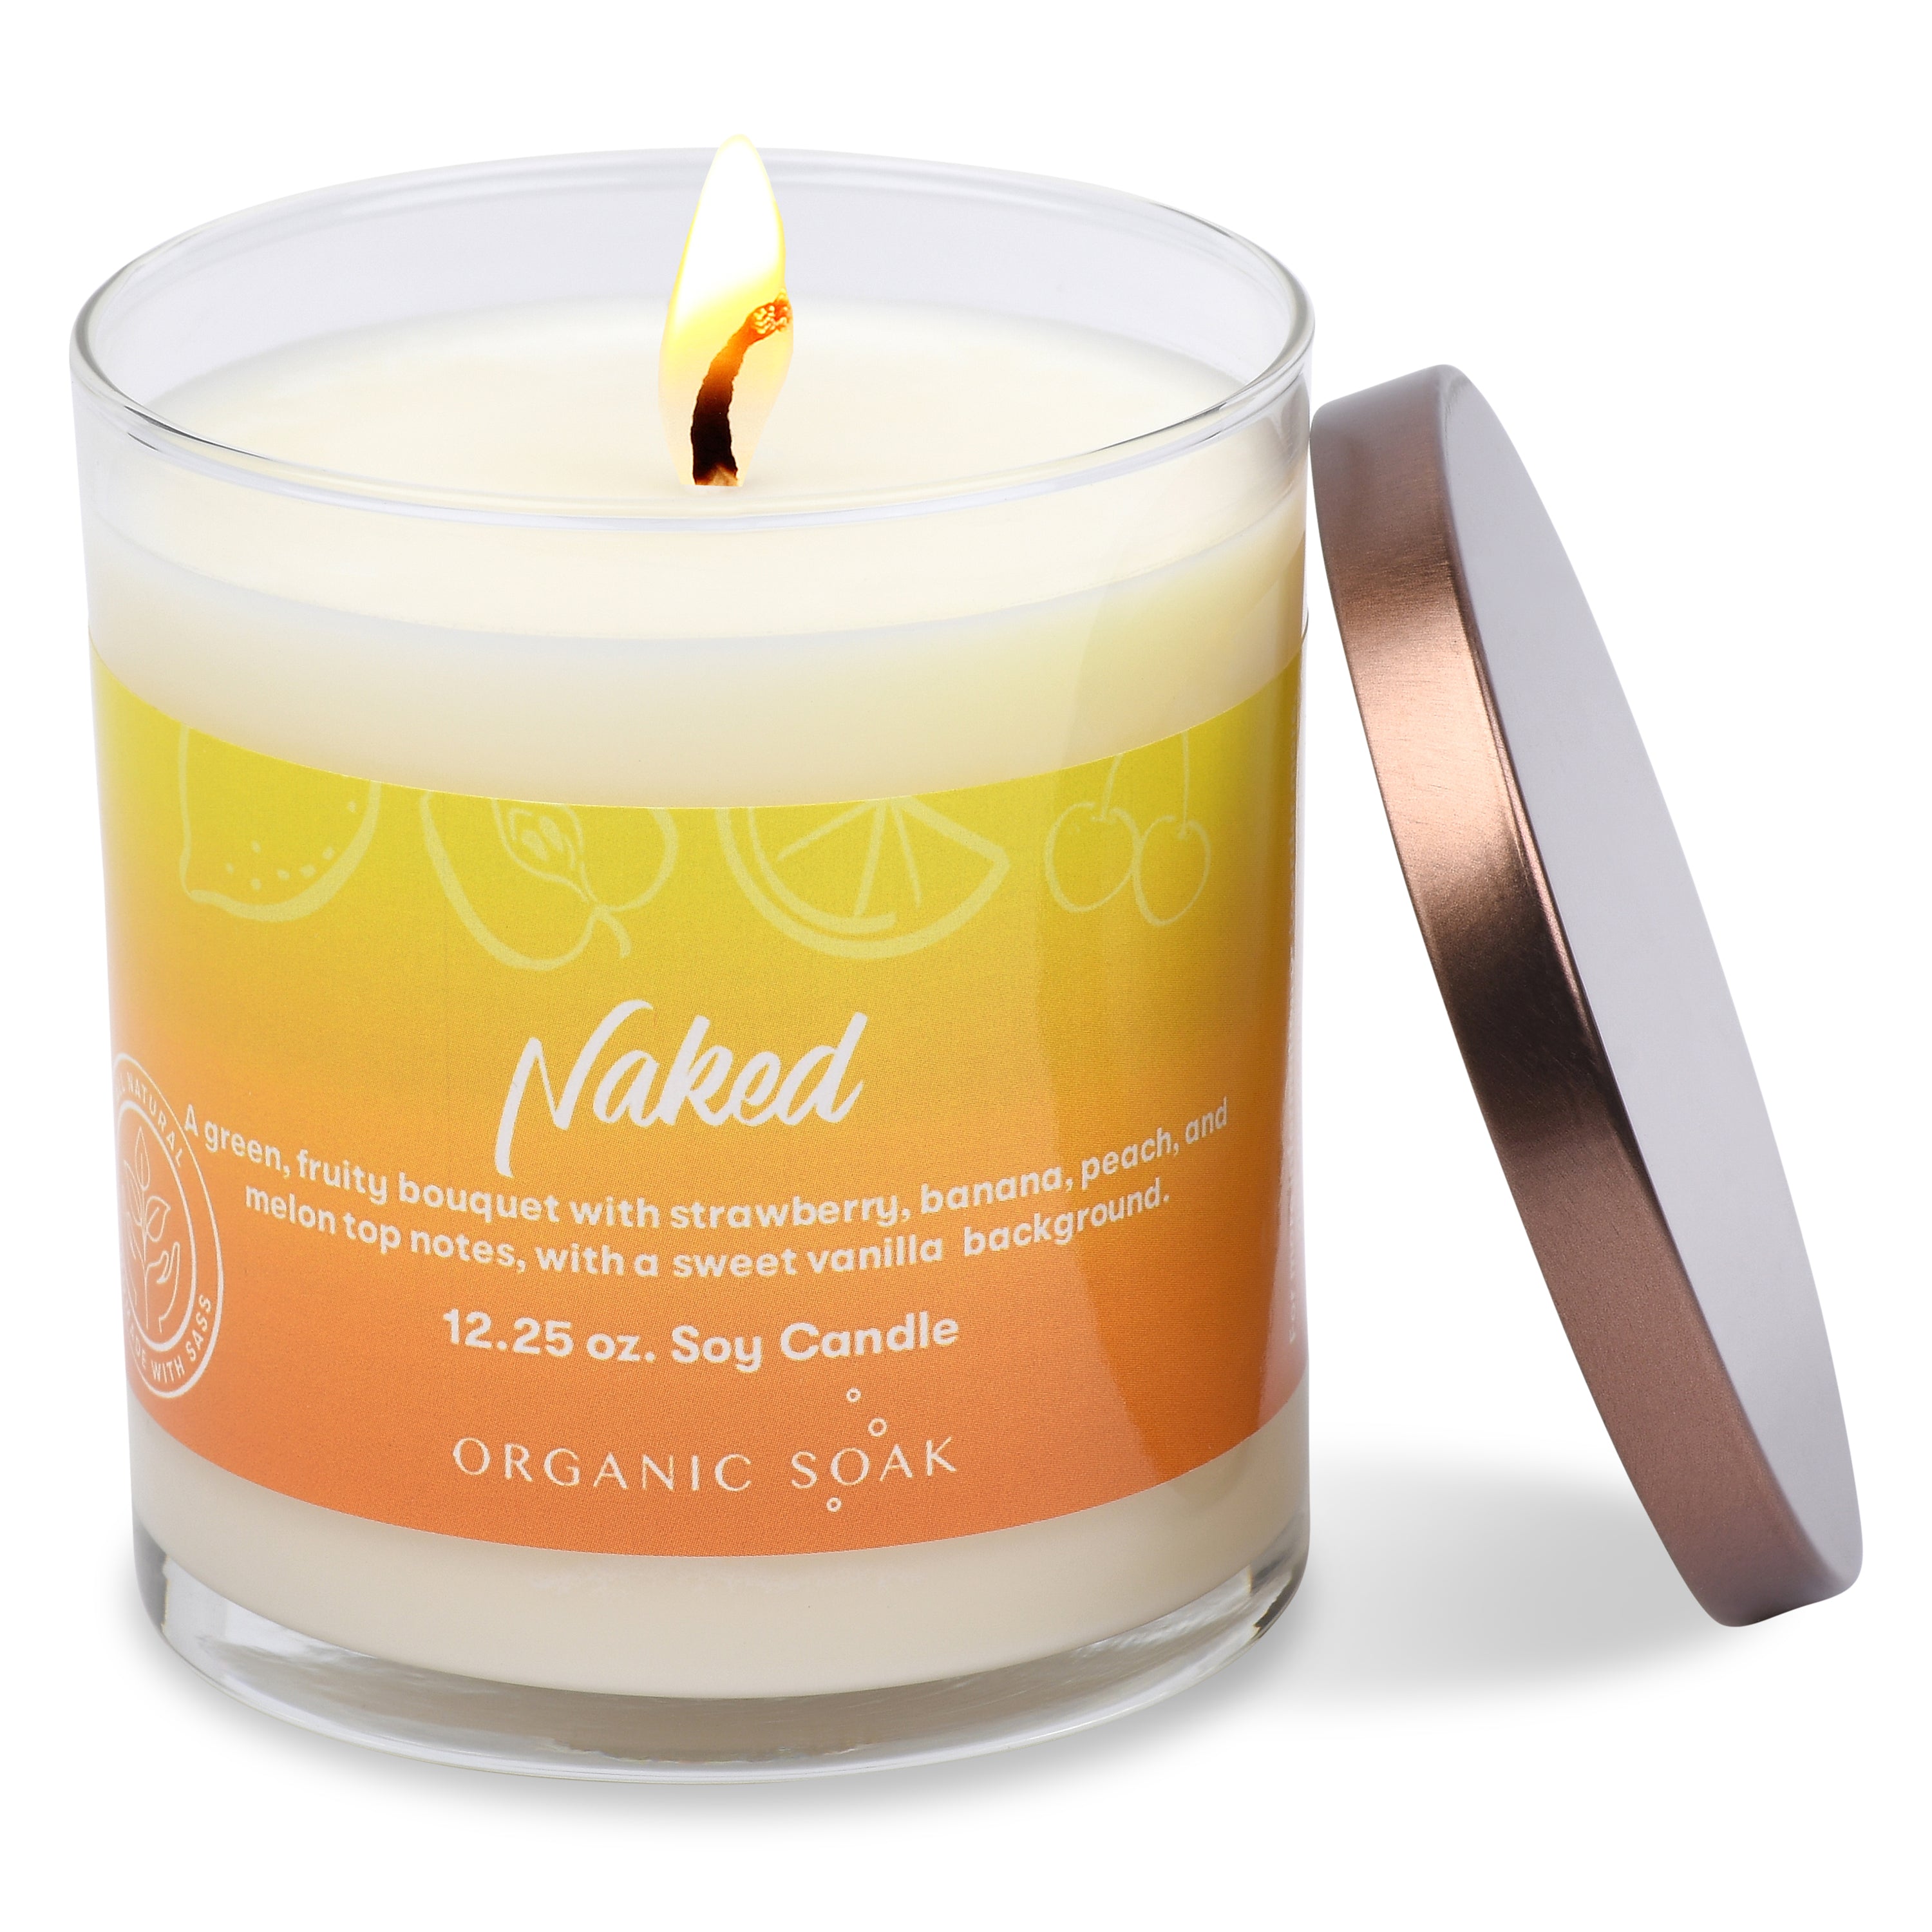 Naked Scented Soy Candle